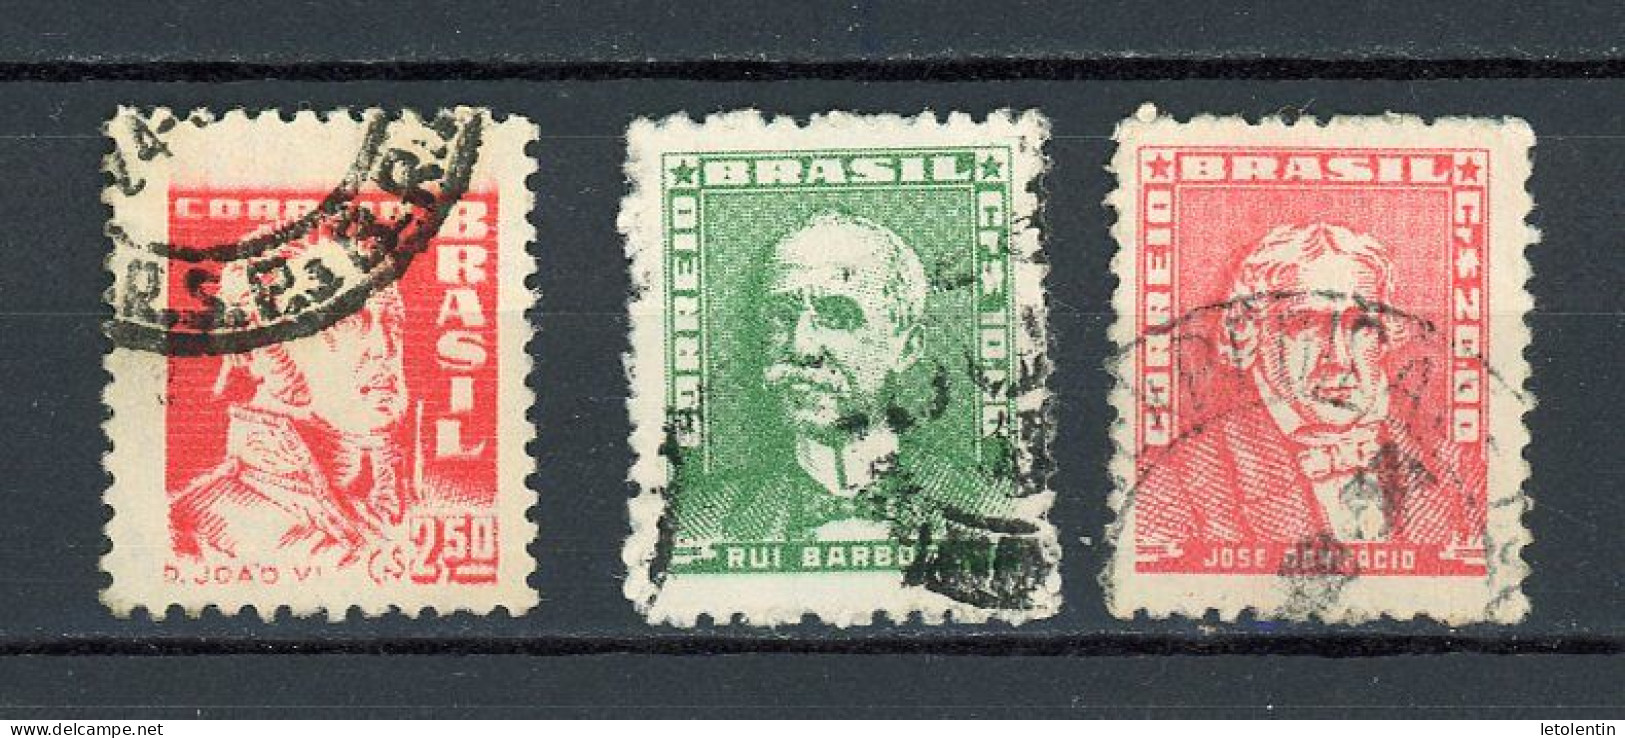 BRESIL - PERSONNAGES - N° Yvert 677+677A+678 Obli. - Used Stamps